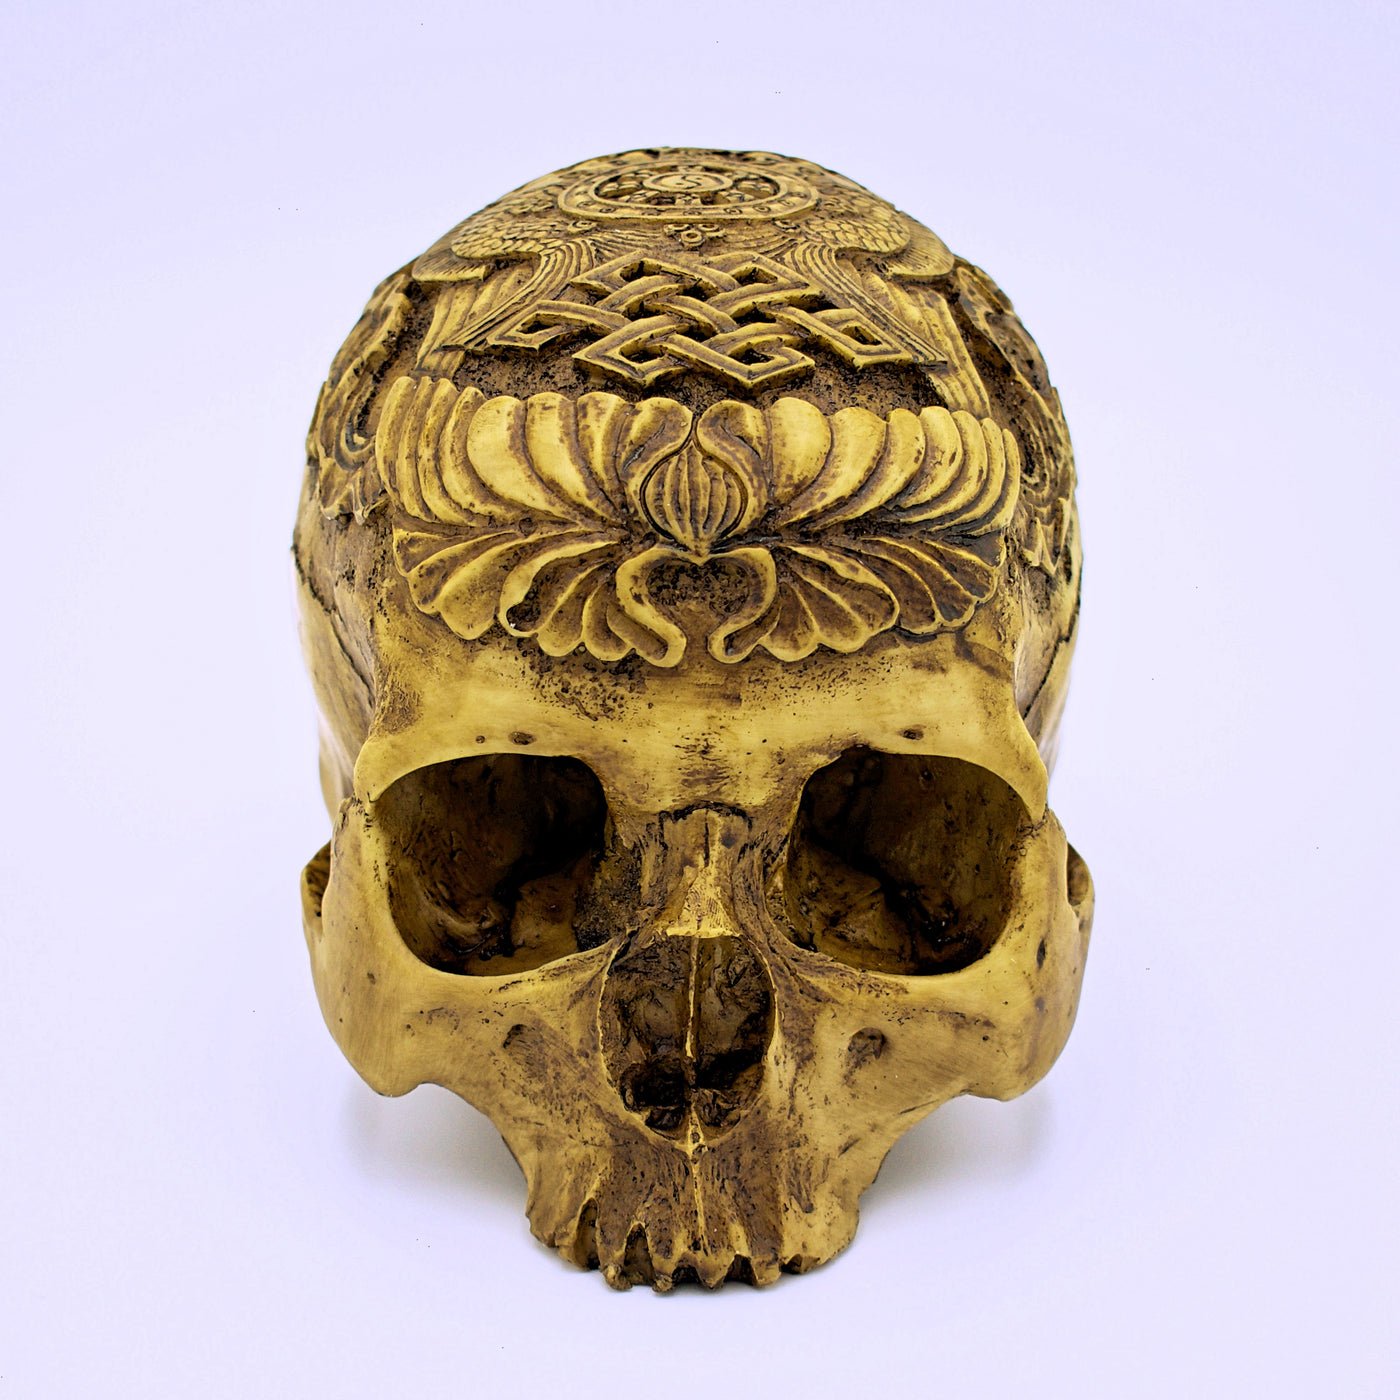 Tibetan Buddhist Carved Skull Sculpture - The Cranio Collections